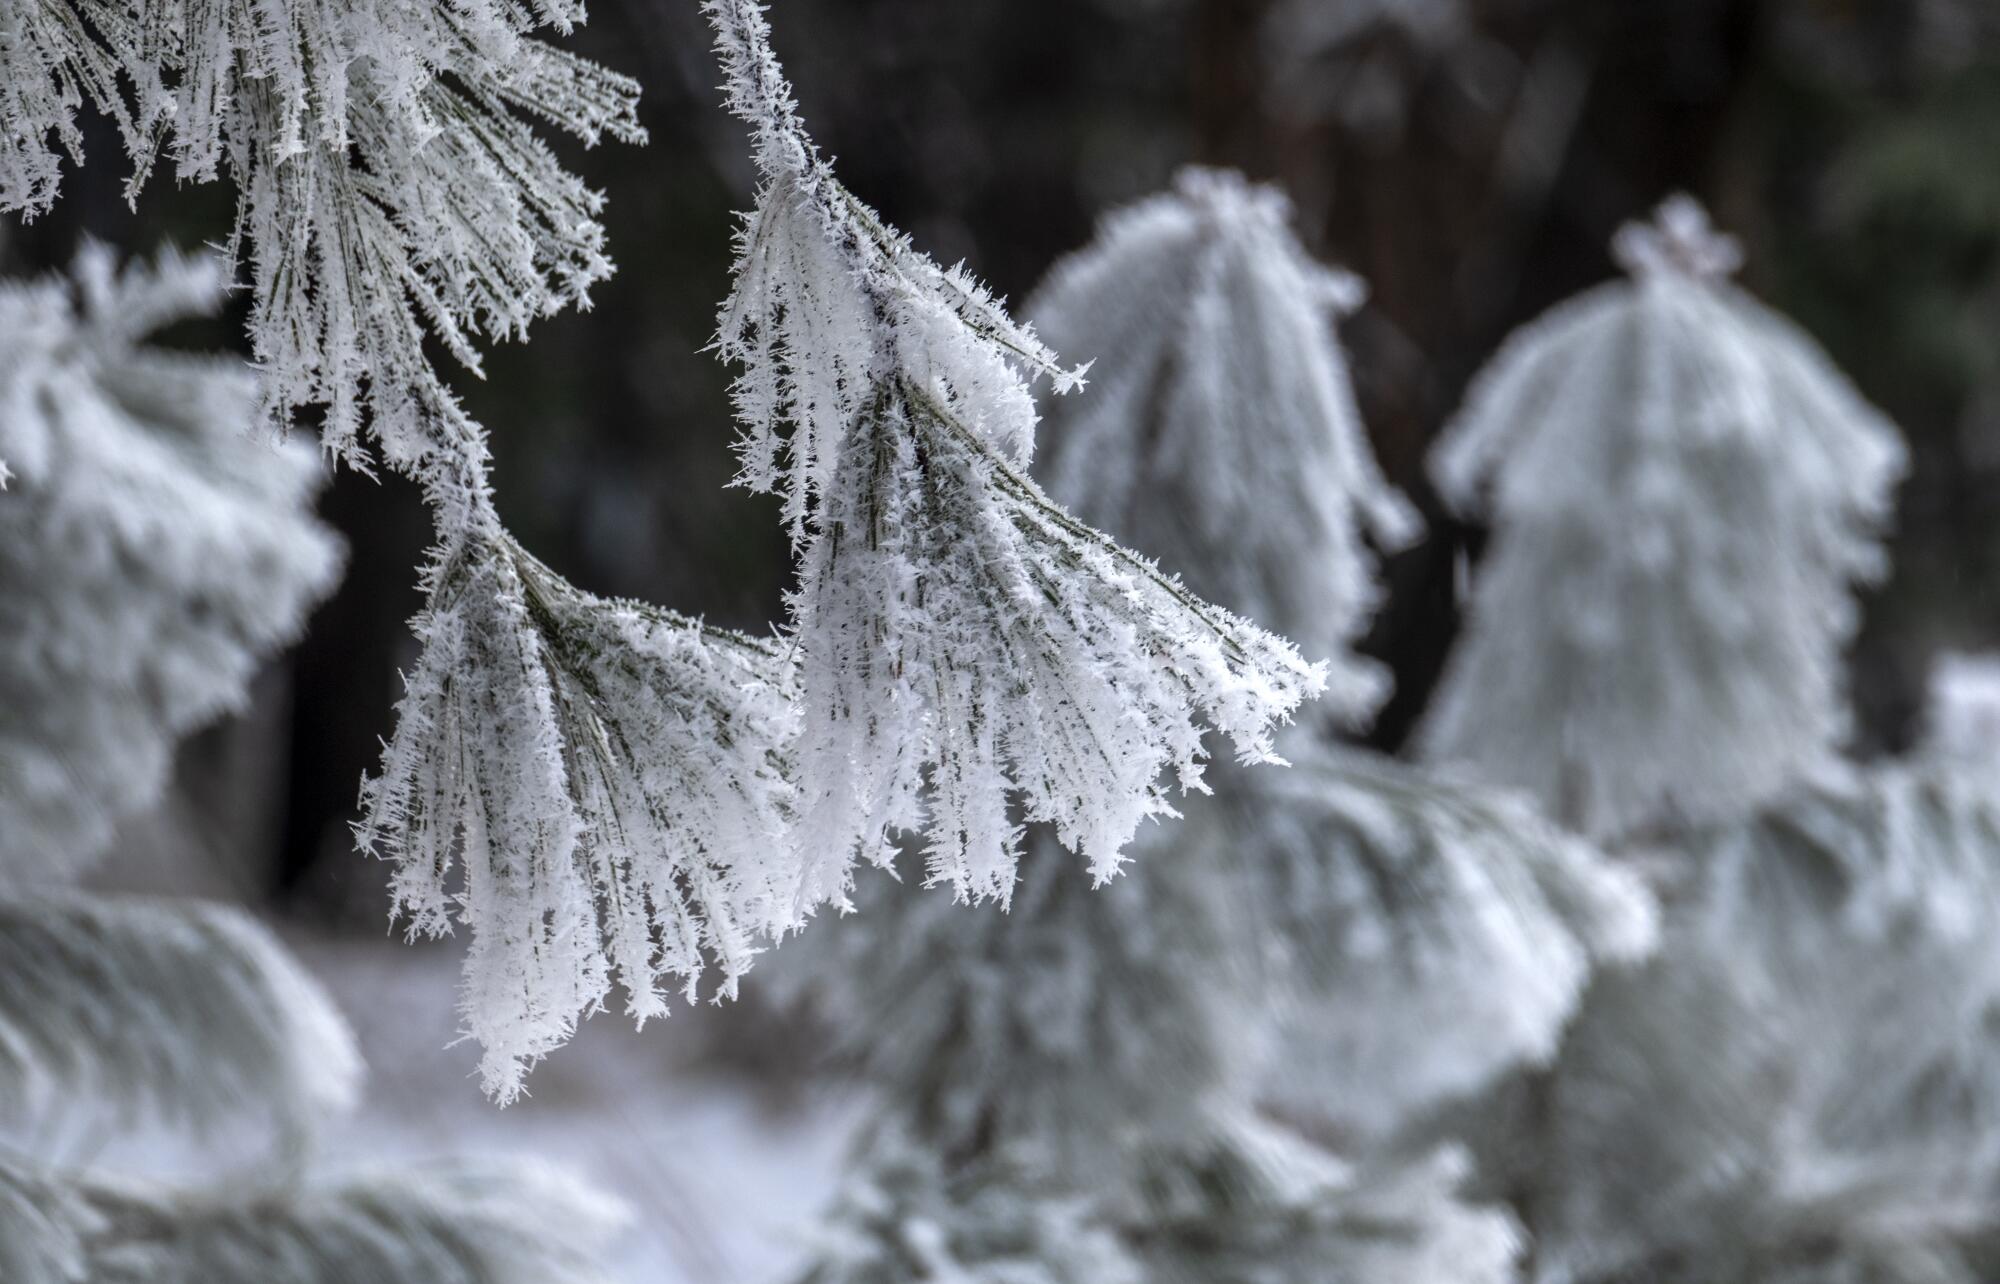 Delicate ice crystals cling to a tree's needles.